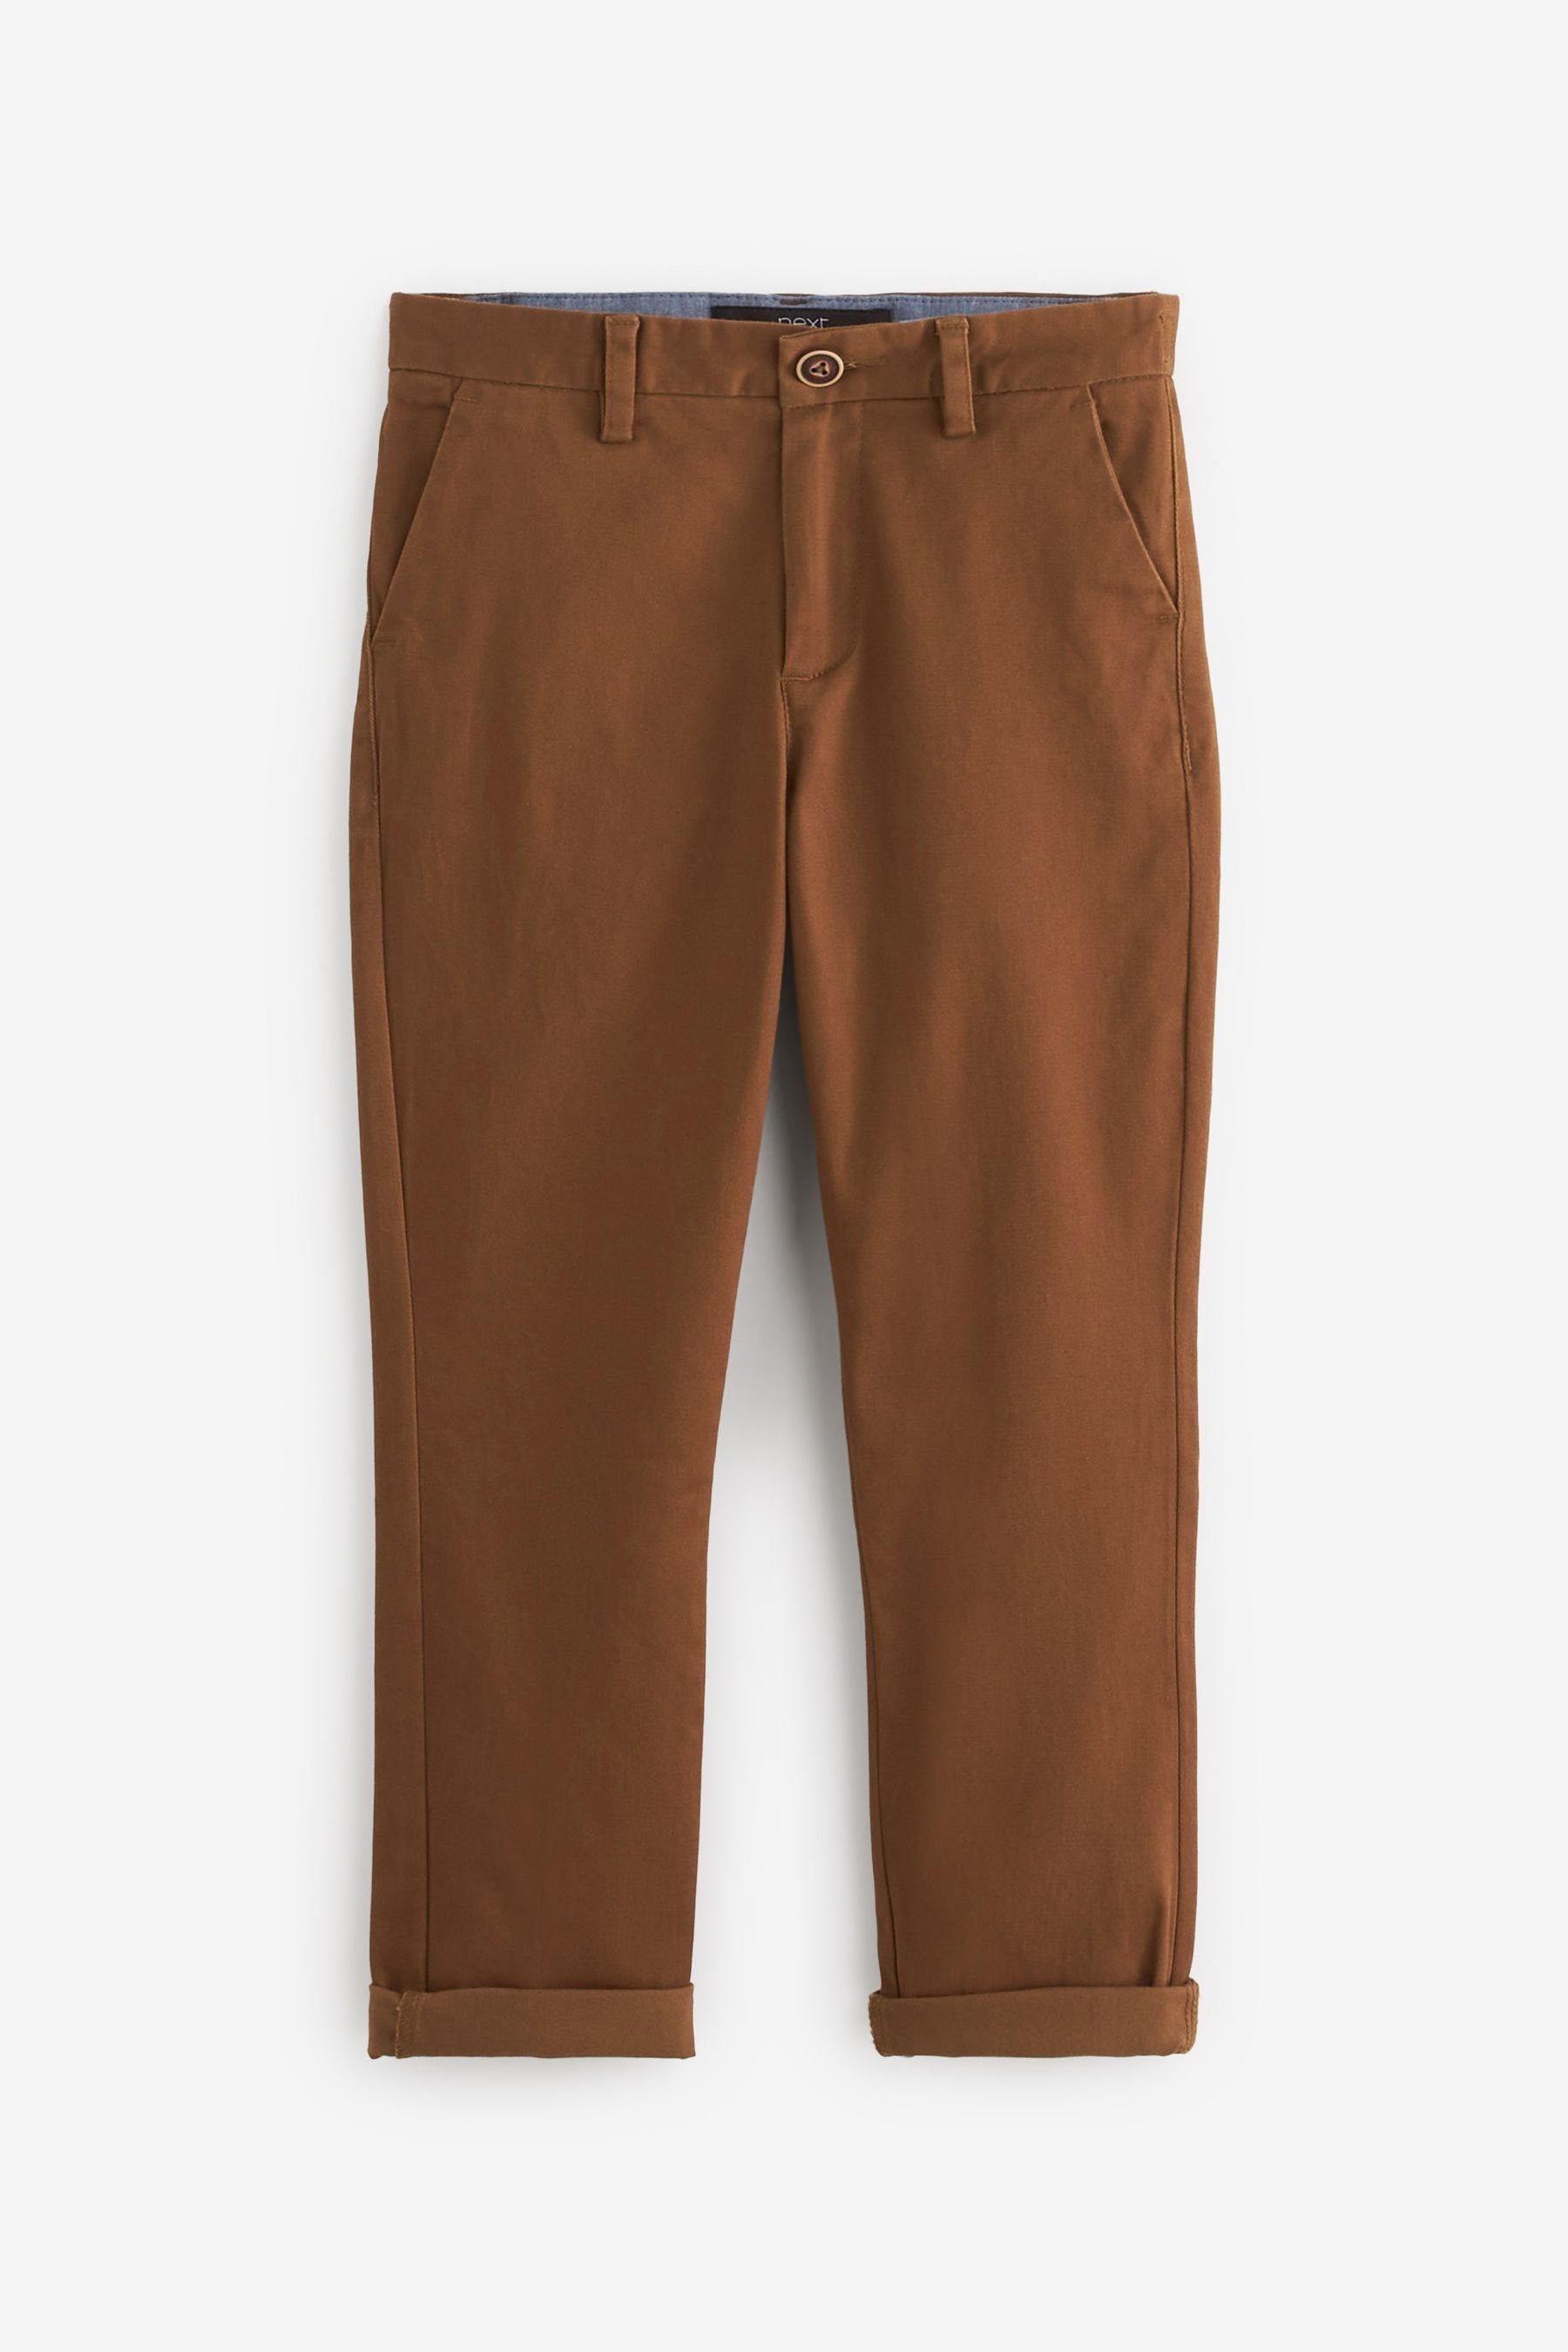 Stretch Chinohose Ginger/Tan Next (1-tlg) Brown mit Chinohose